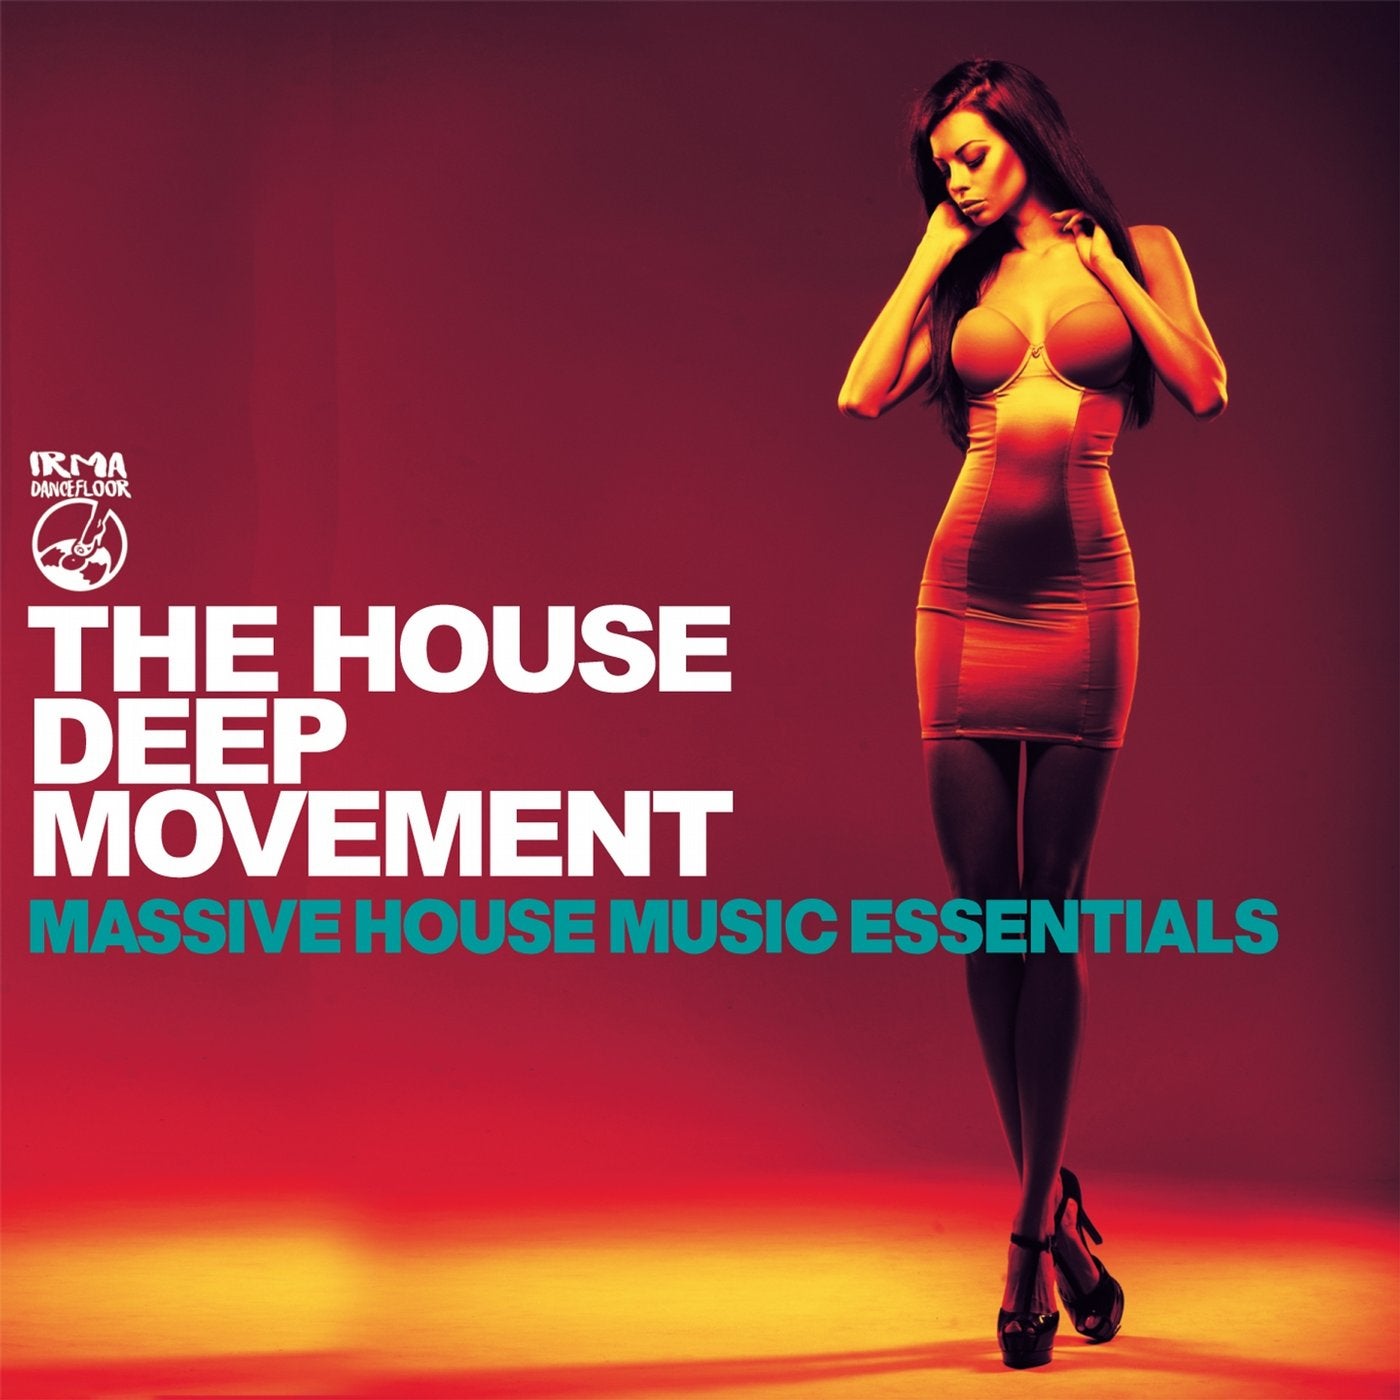 The House Deep Movement (Massive House Music Essentials)